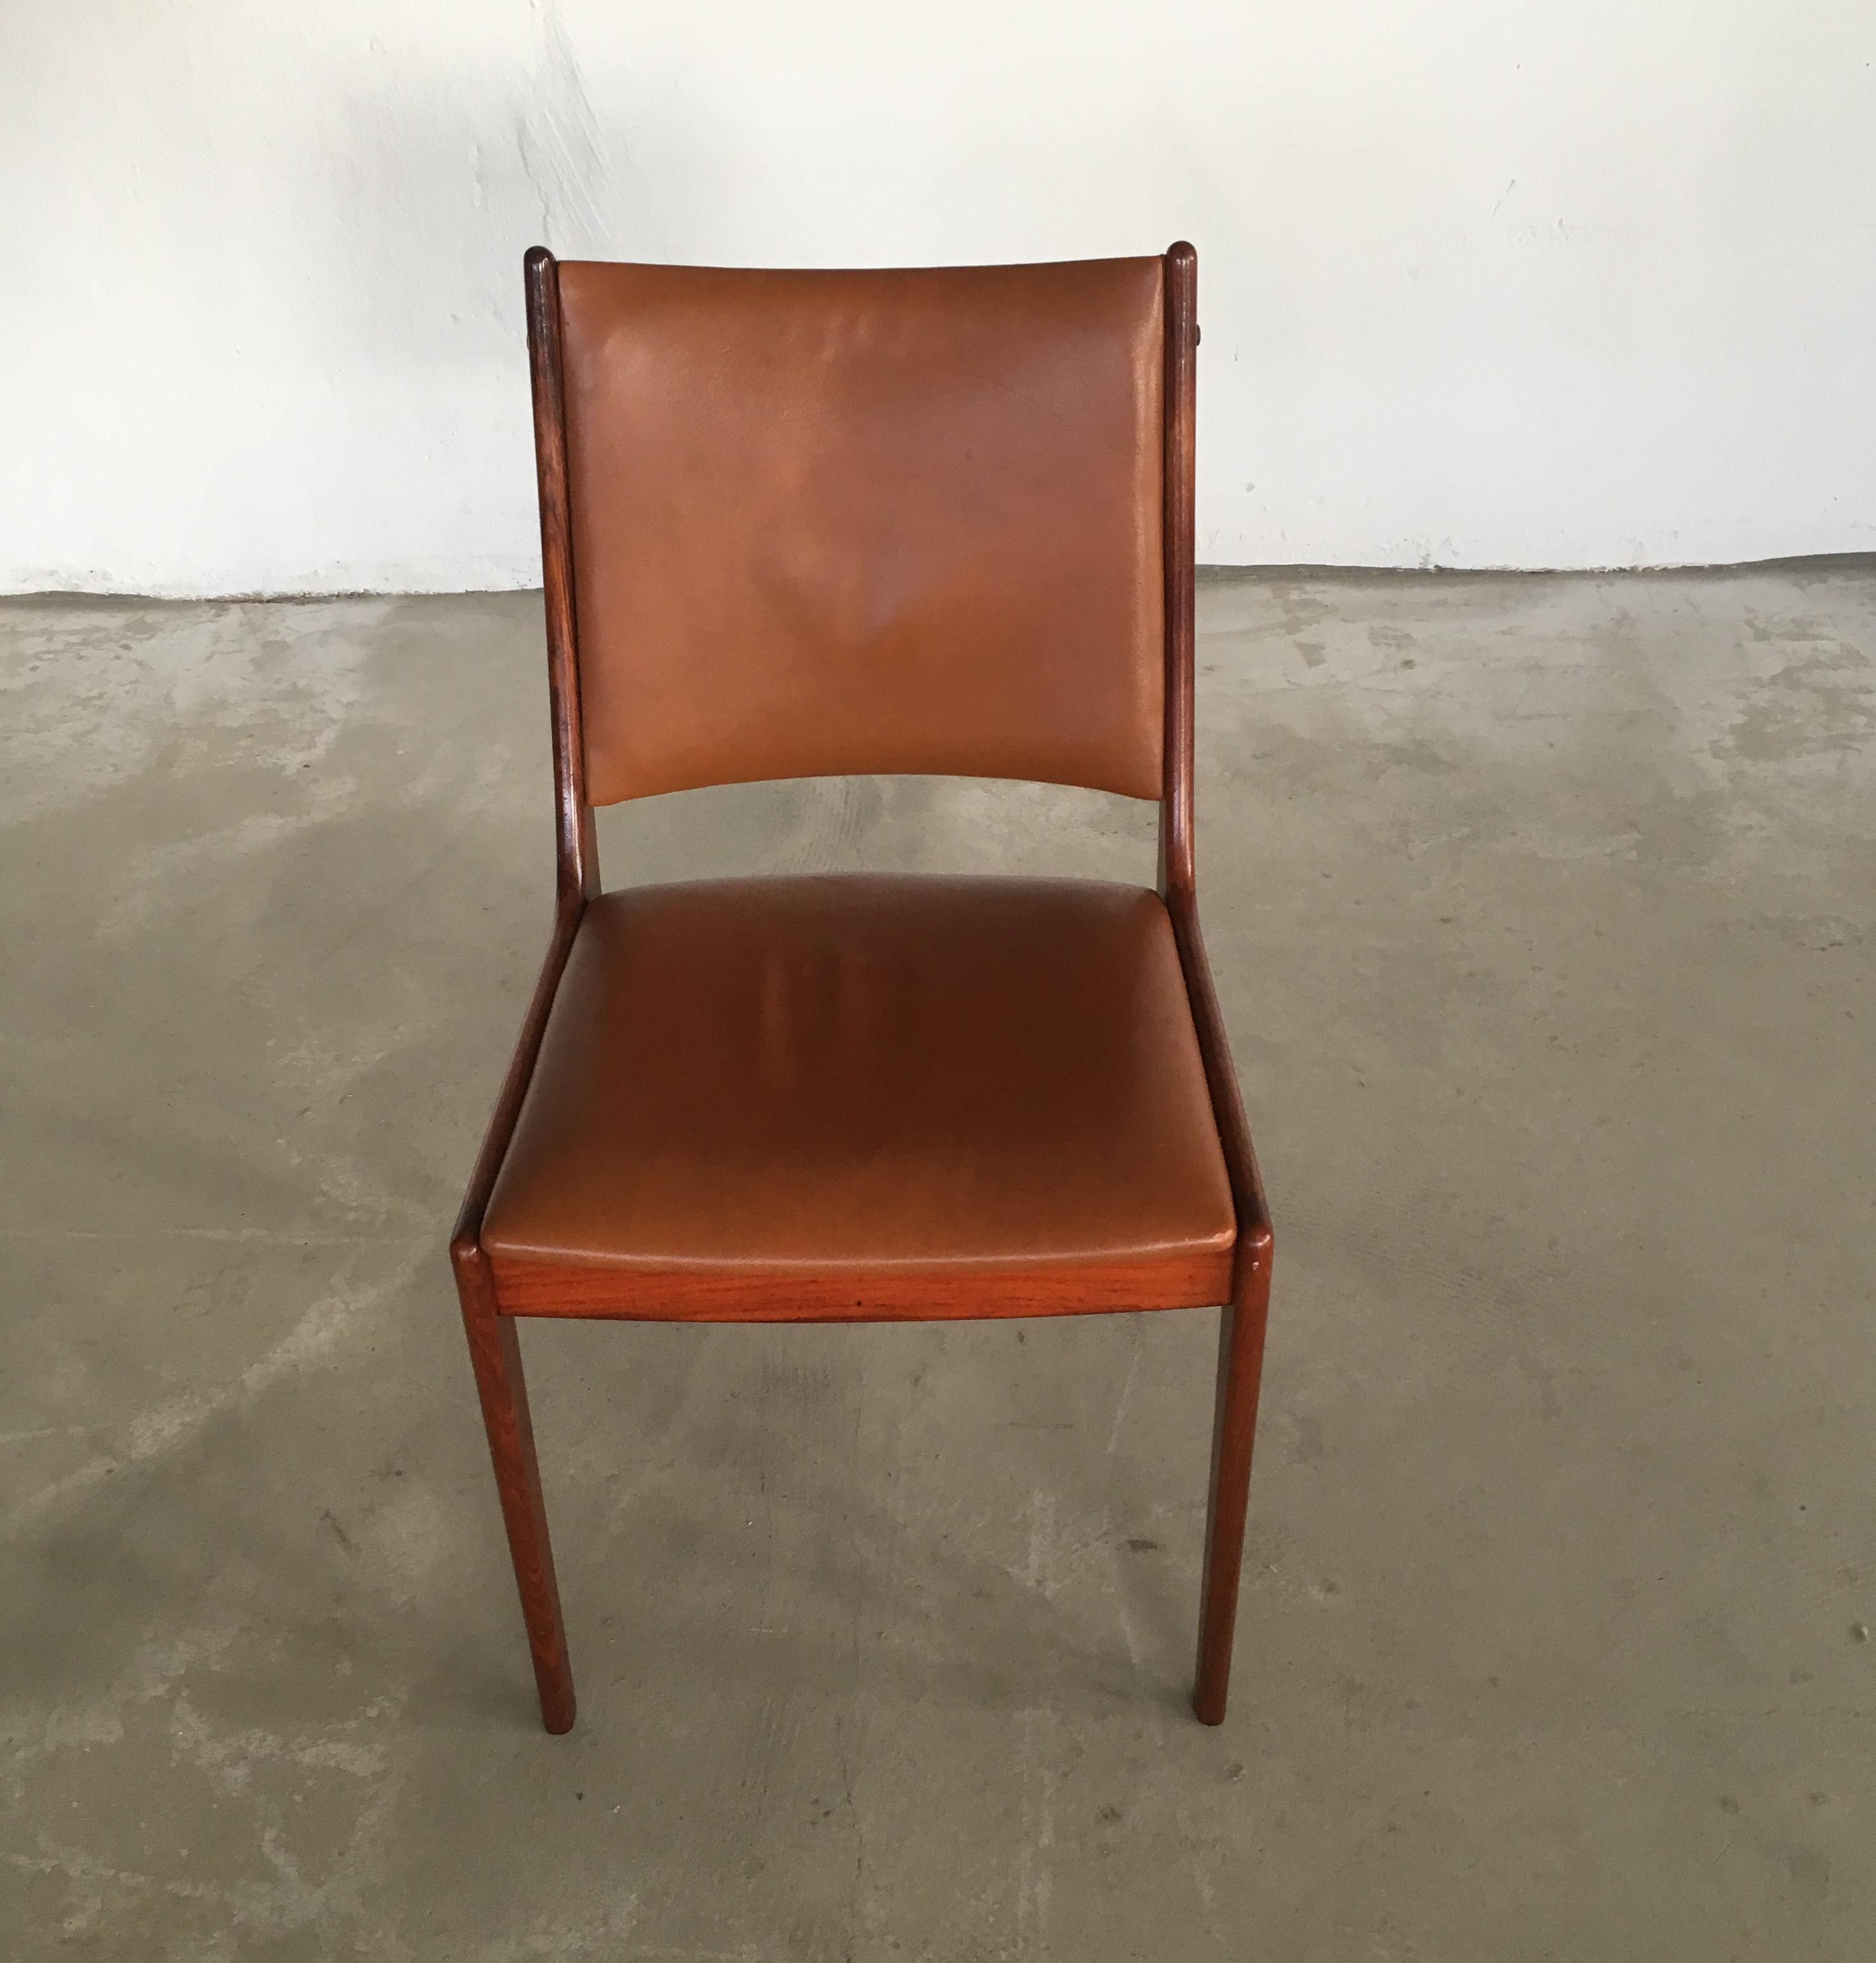 Set of six 1960s Johannes Andersen dining chairs in rosewood made by Uldum Møbler, Denmark including custom reupholstery.

The set of dining chairs feature a clean simple yet elegant design that will fit in well in mamy settings. 

The chairs have